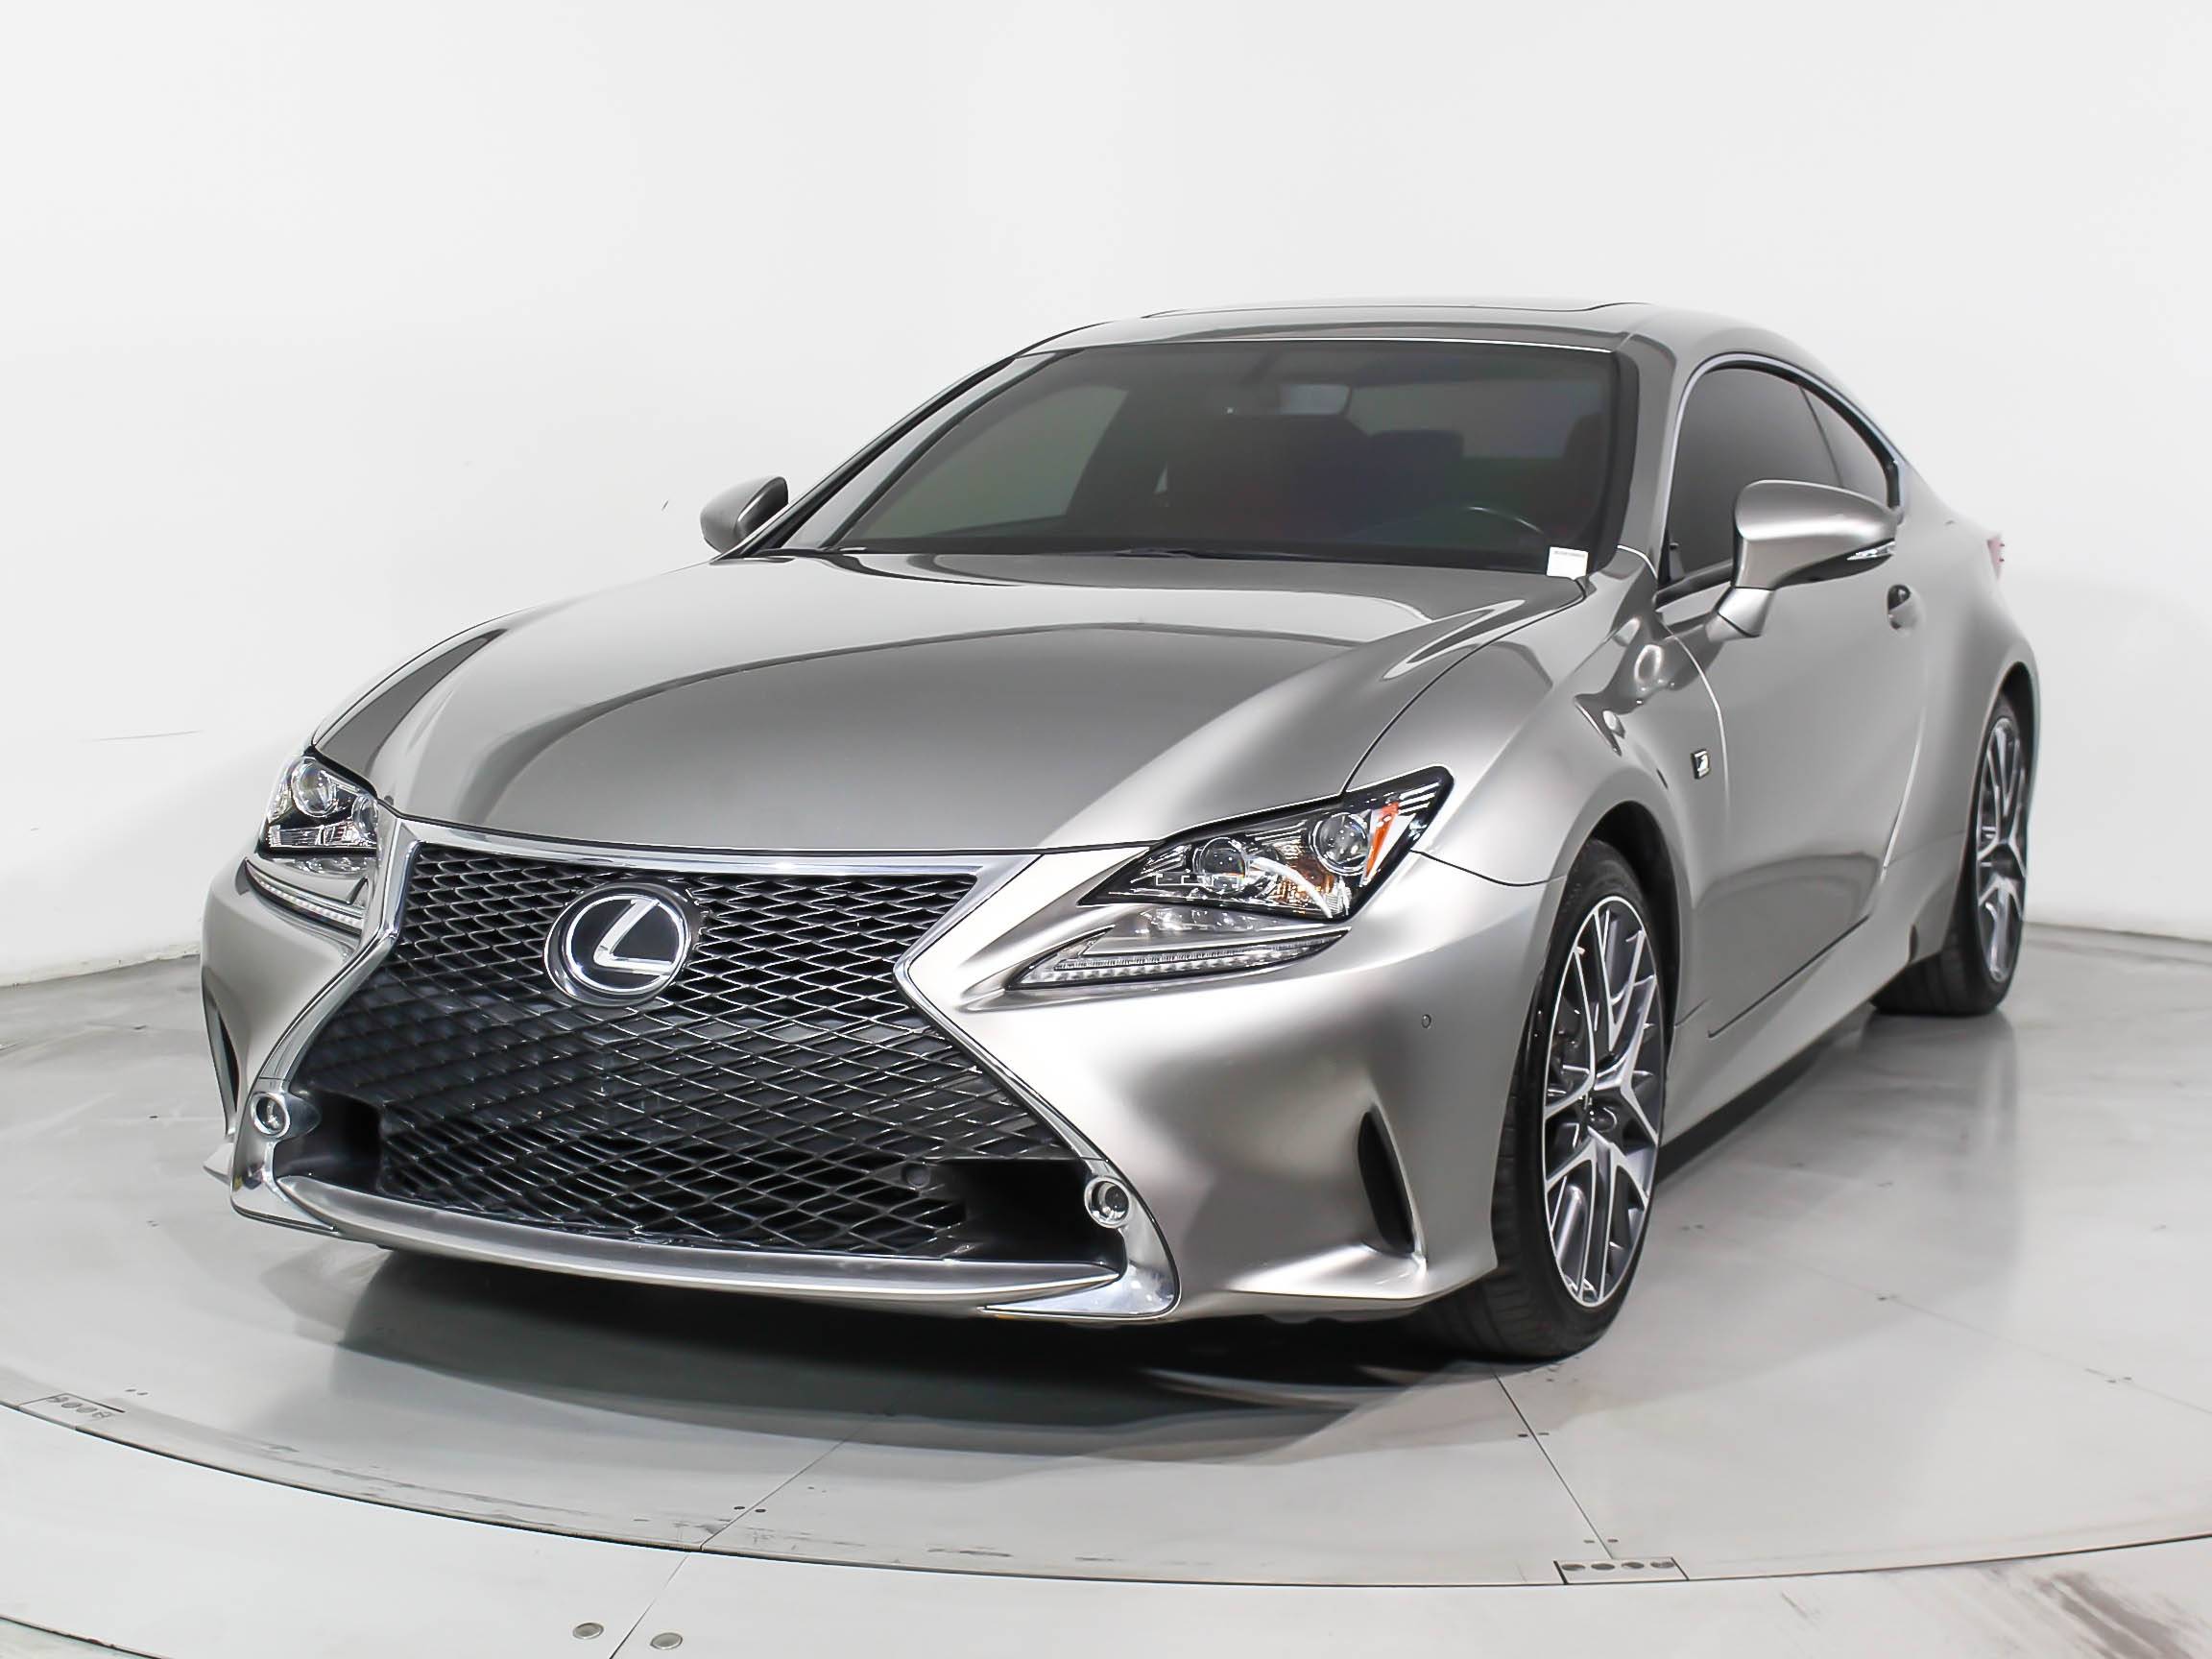 Used 2016 LEXUS RC 200T F Sport for sale in HOLLYWOOD | 103645